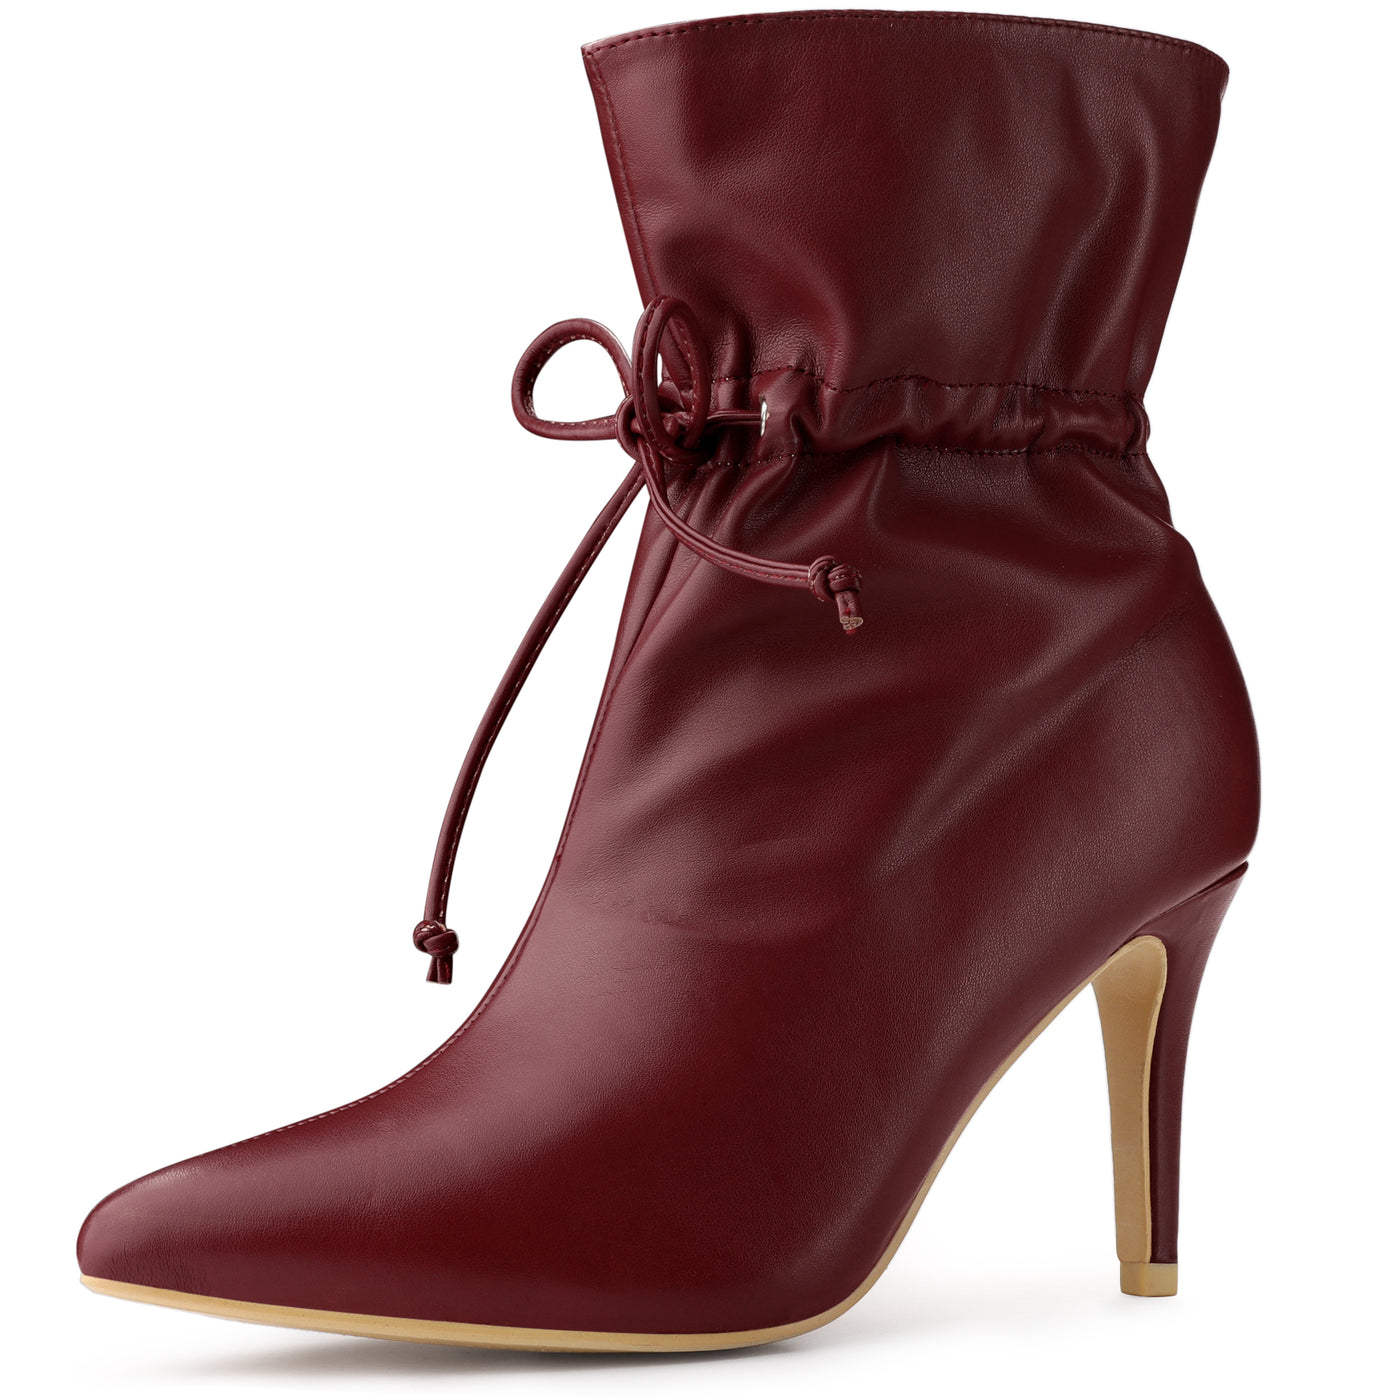 Allegra K Pointed Toe Drawstring Pull On Stiletto Heel Ankle Boots